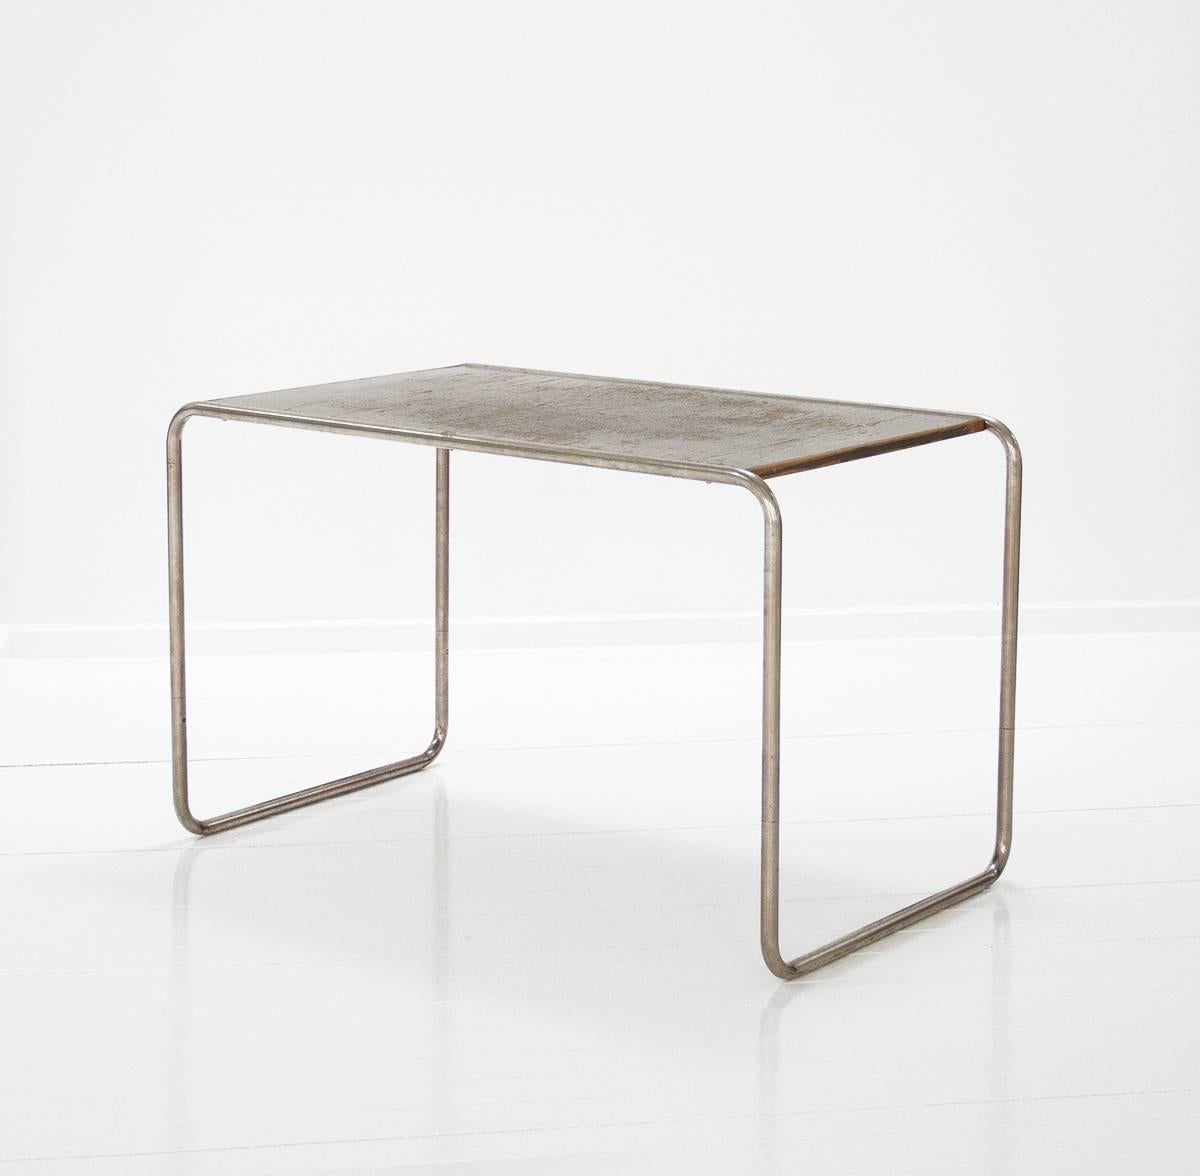 Table Designed by Marcel Breuer, Chromed Tubular Steel Lacquered Wood, 1930s For Sale 2